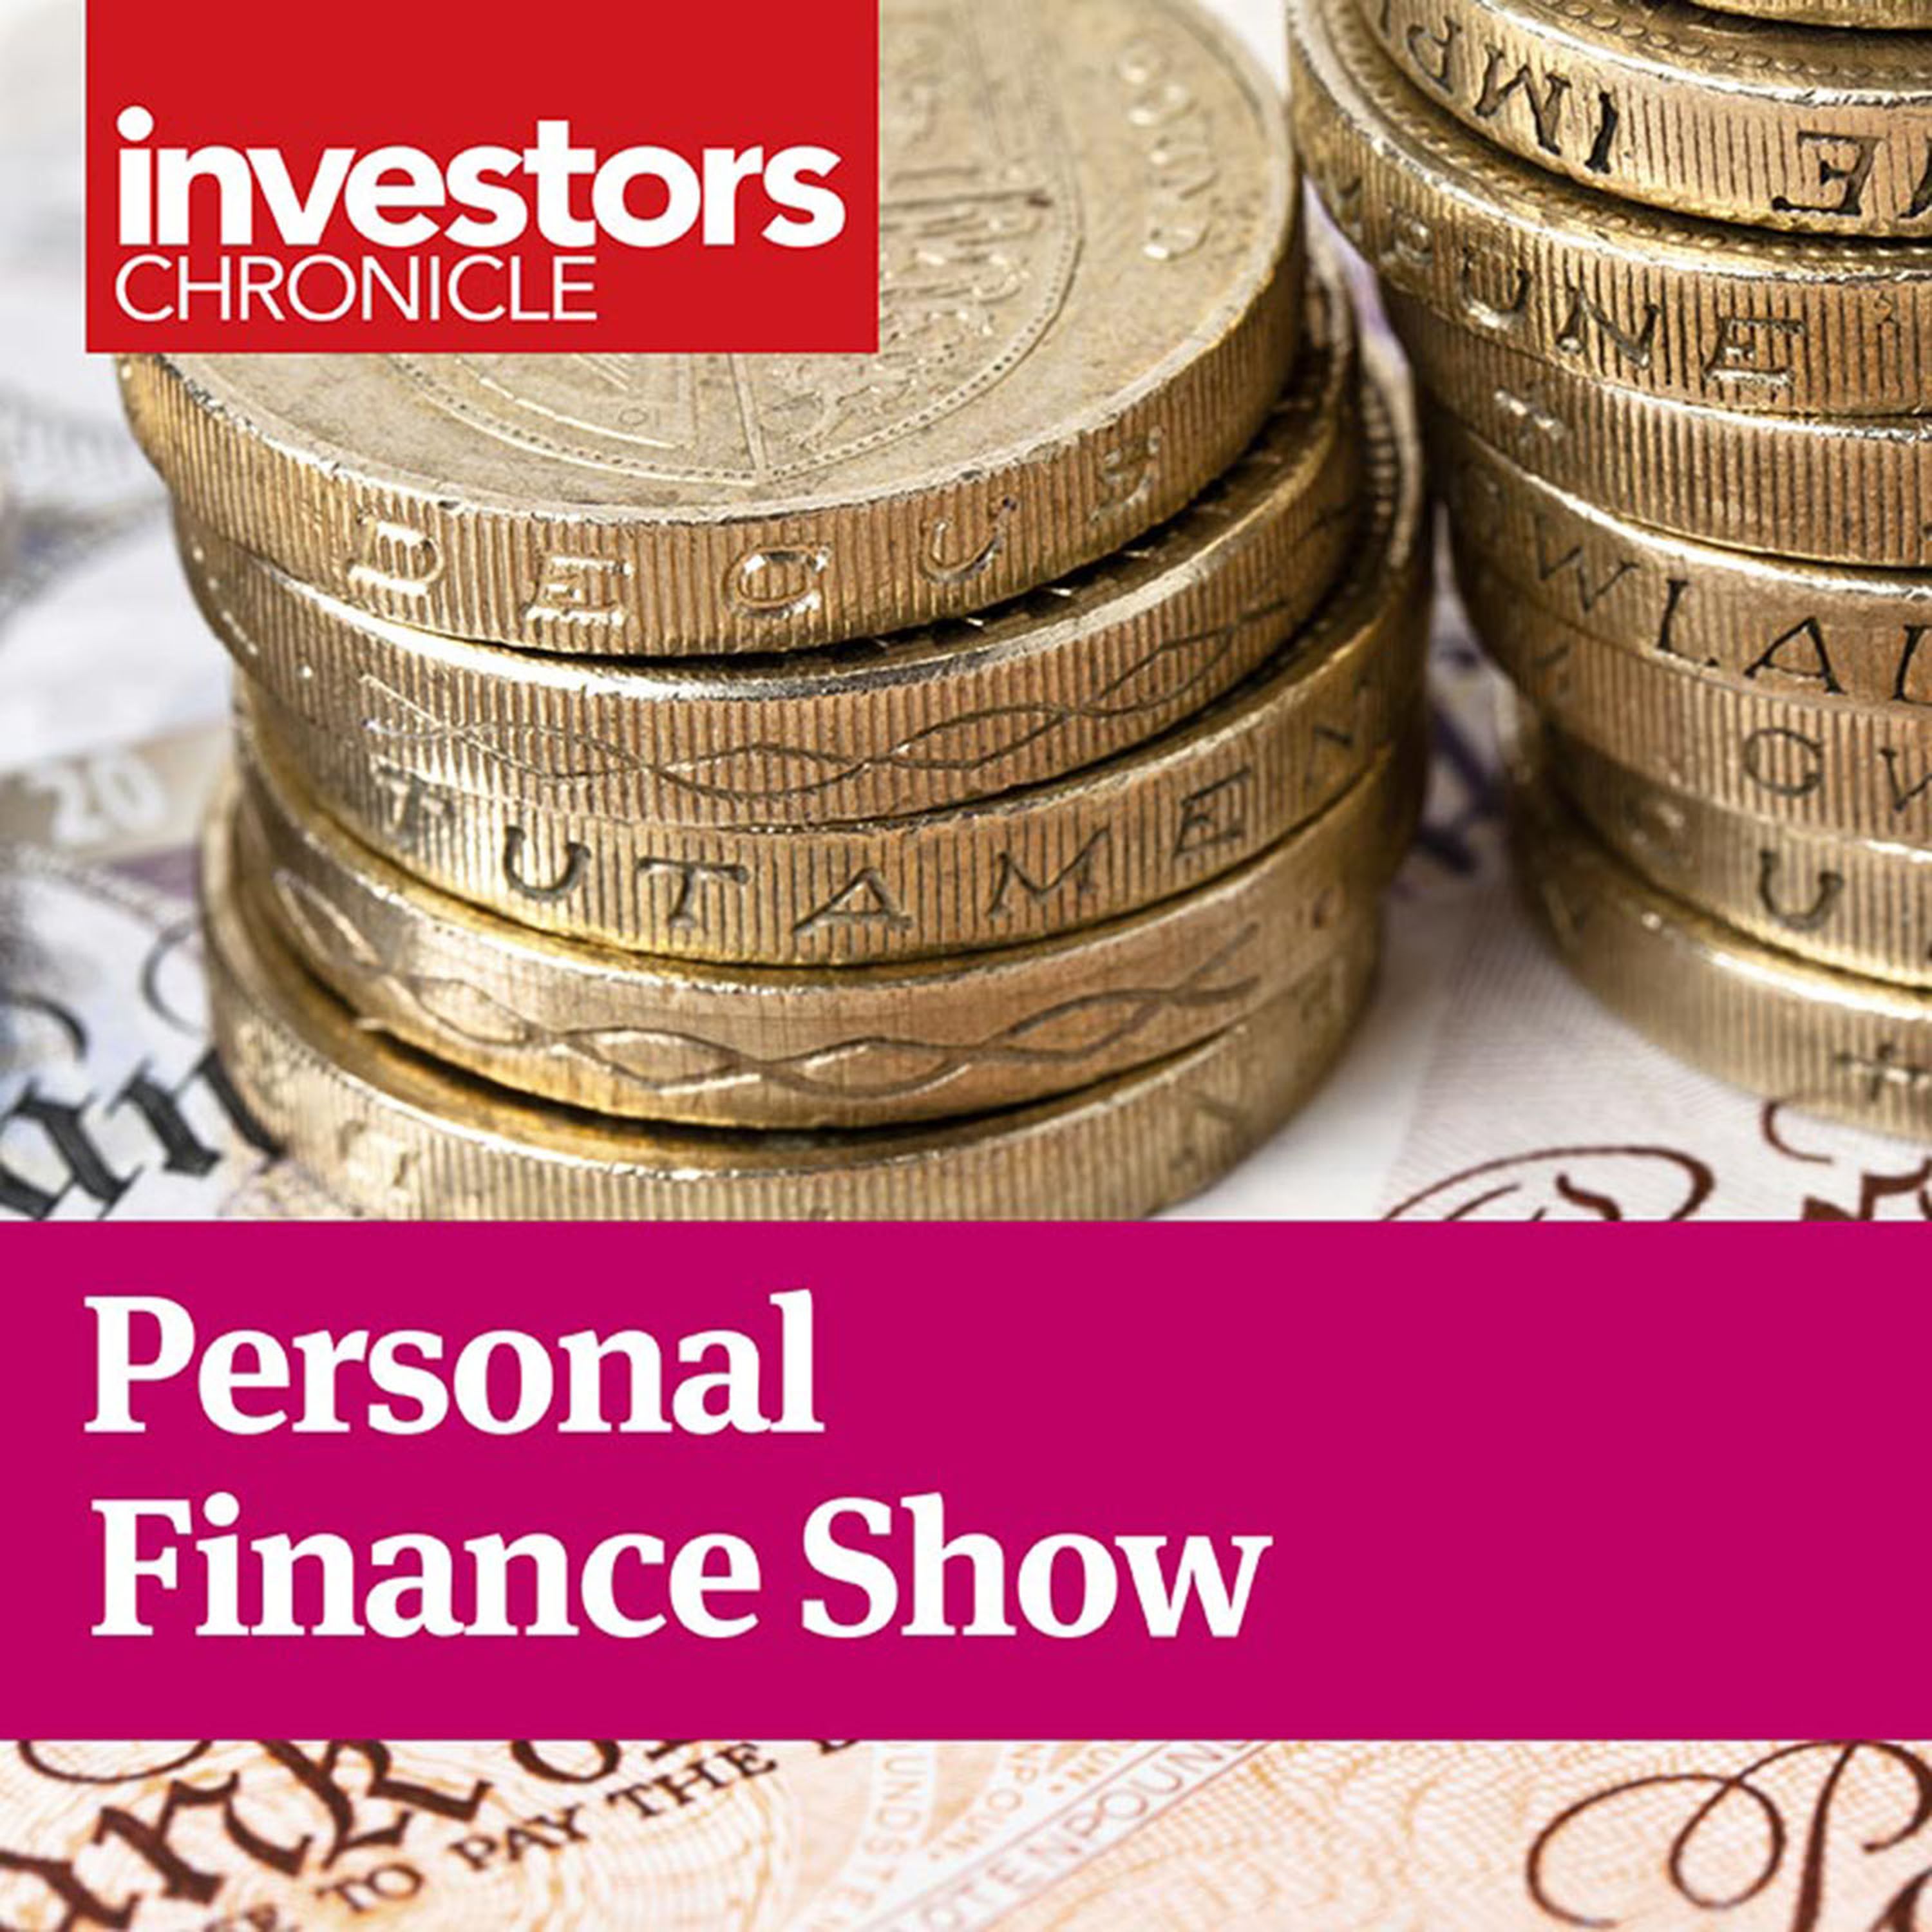 Personal Finance Show: The Santa rally and useful bonds